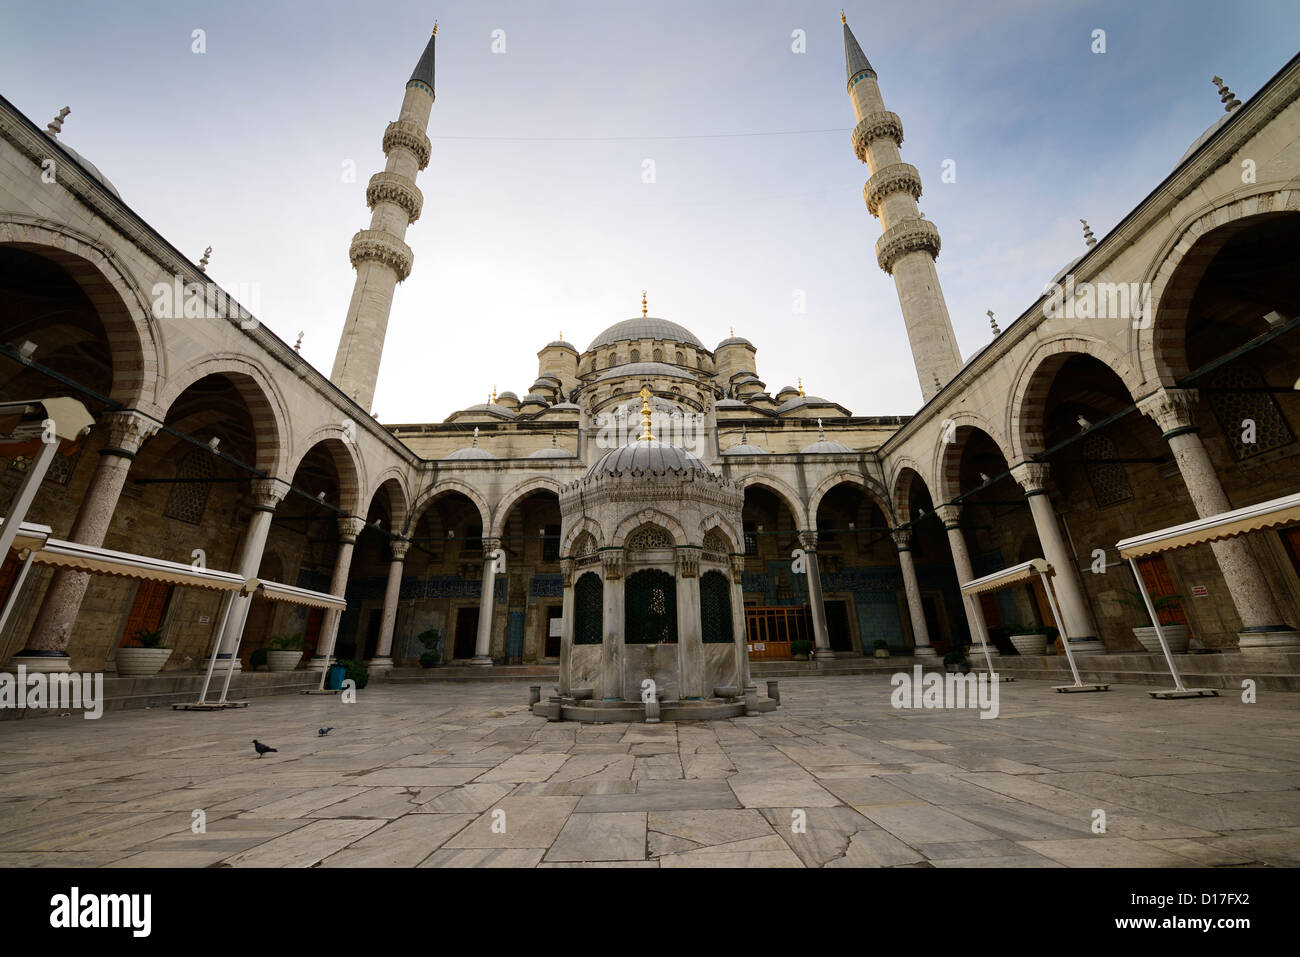 Monumental courtyard with two minarets and ablution fountain at the New Mosque Istanbul Stock Photo